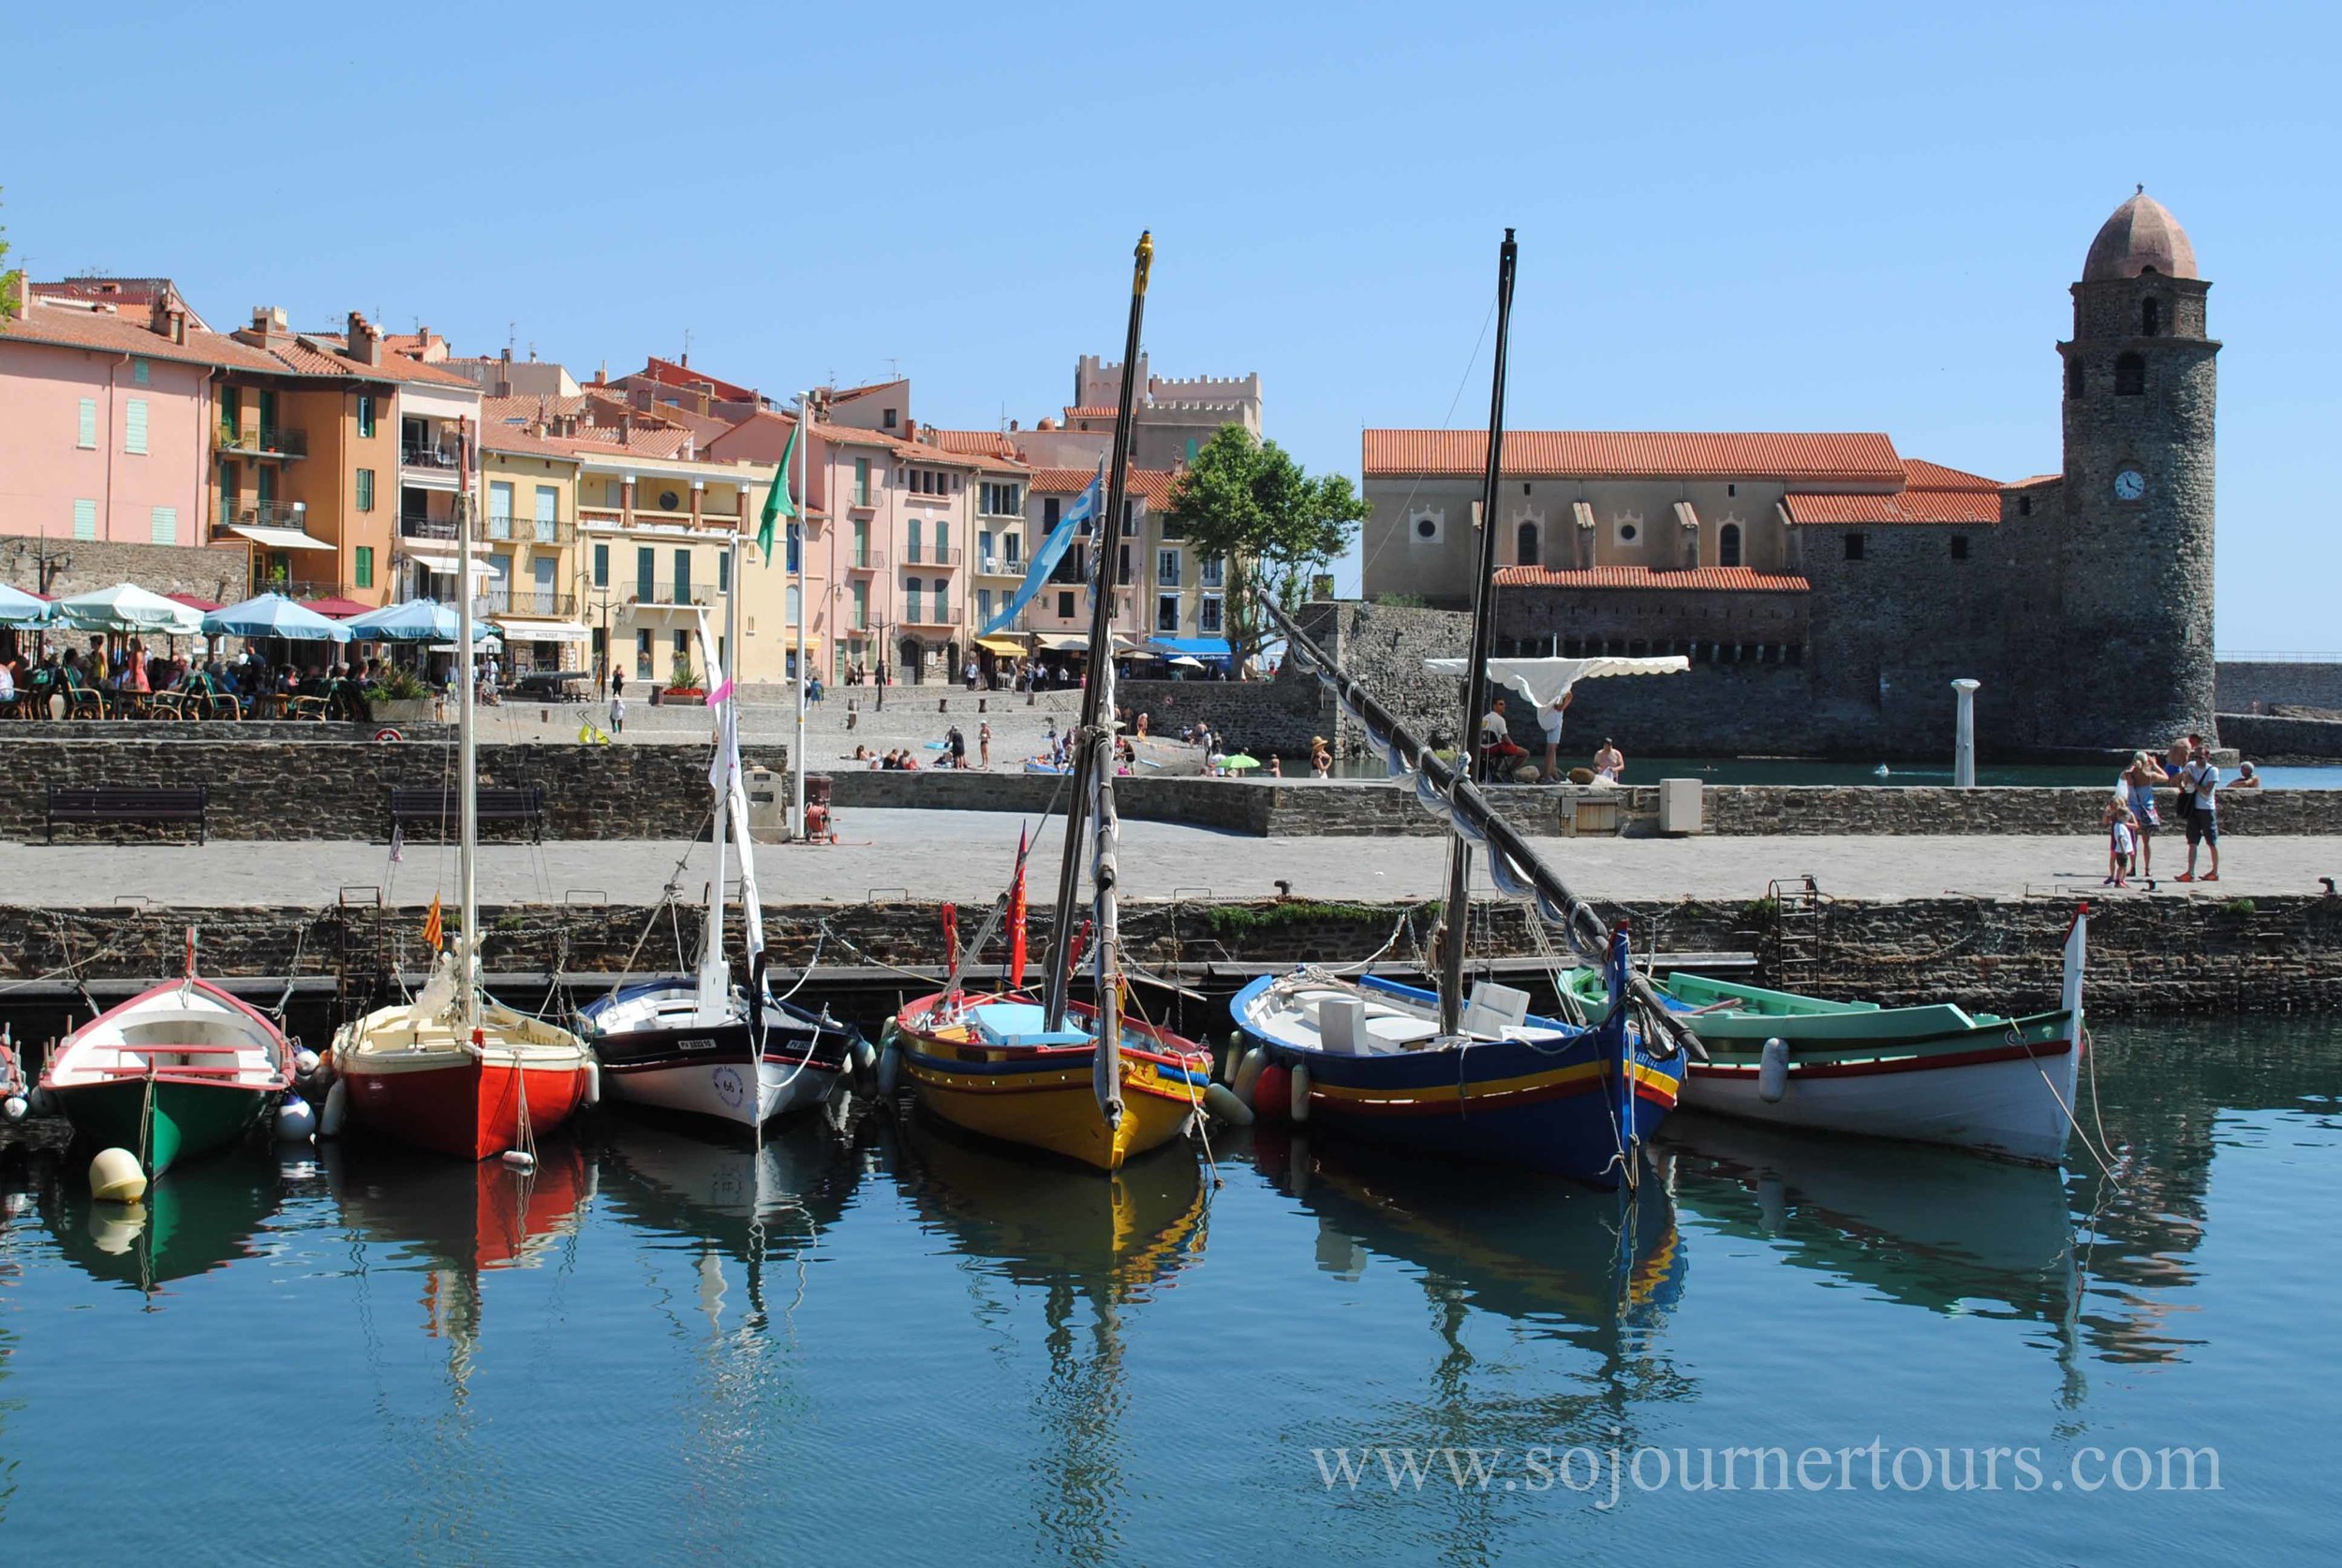 Collioure: Languedoc-Roussillon, France (Sojourner Tours)